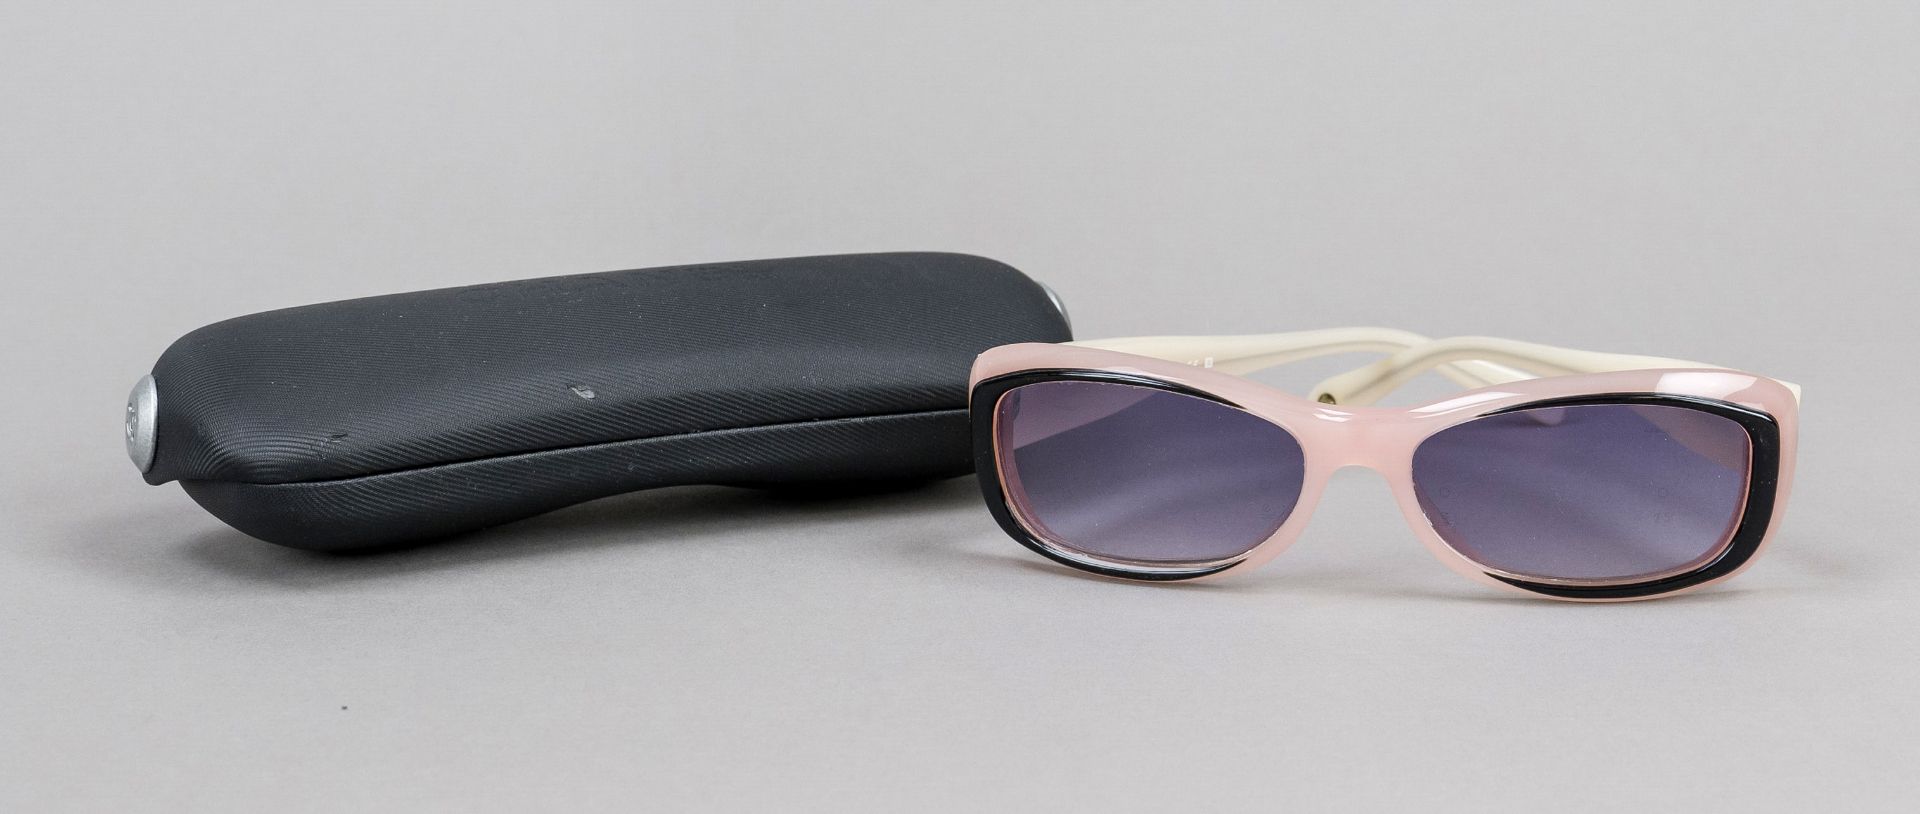 Chanel, sunglasses, powder-coloured plastic frame with black accents, violet tinted lenses with